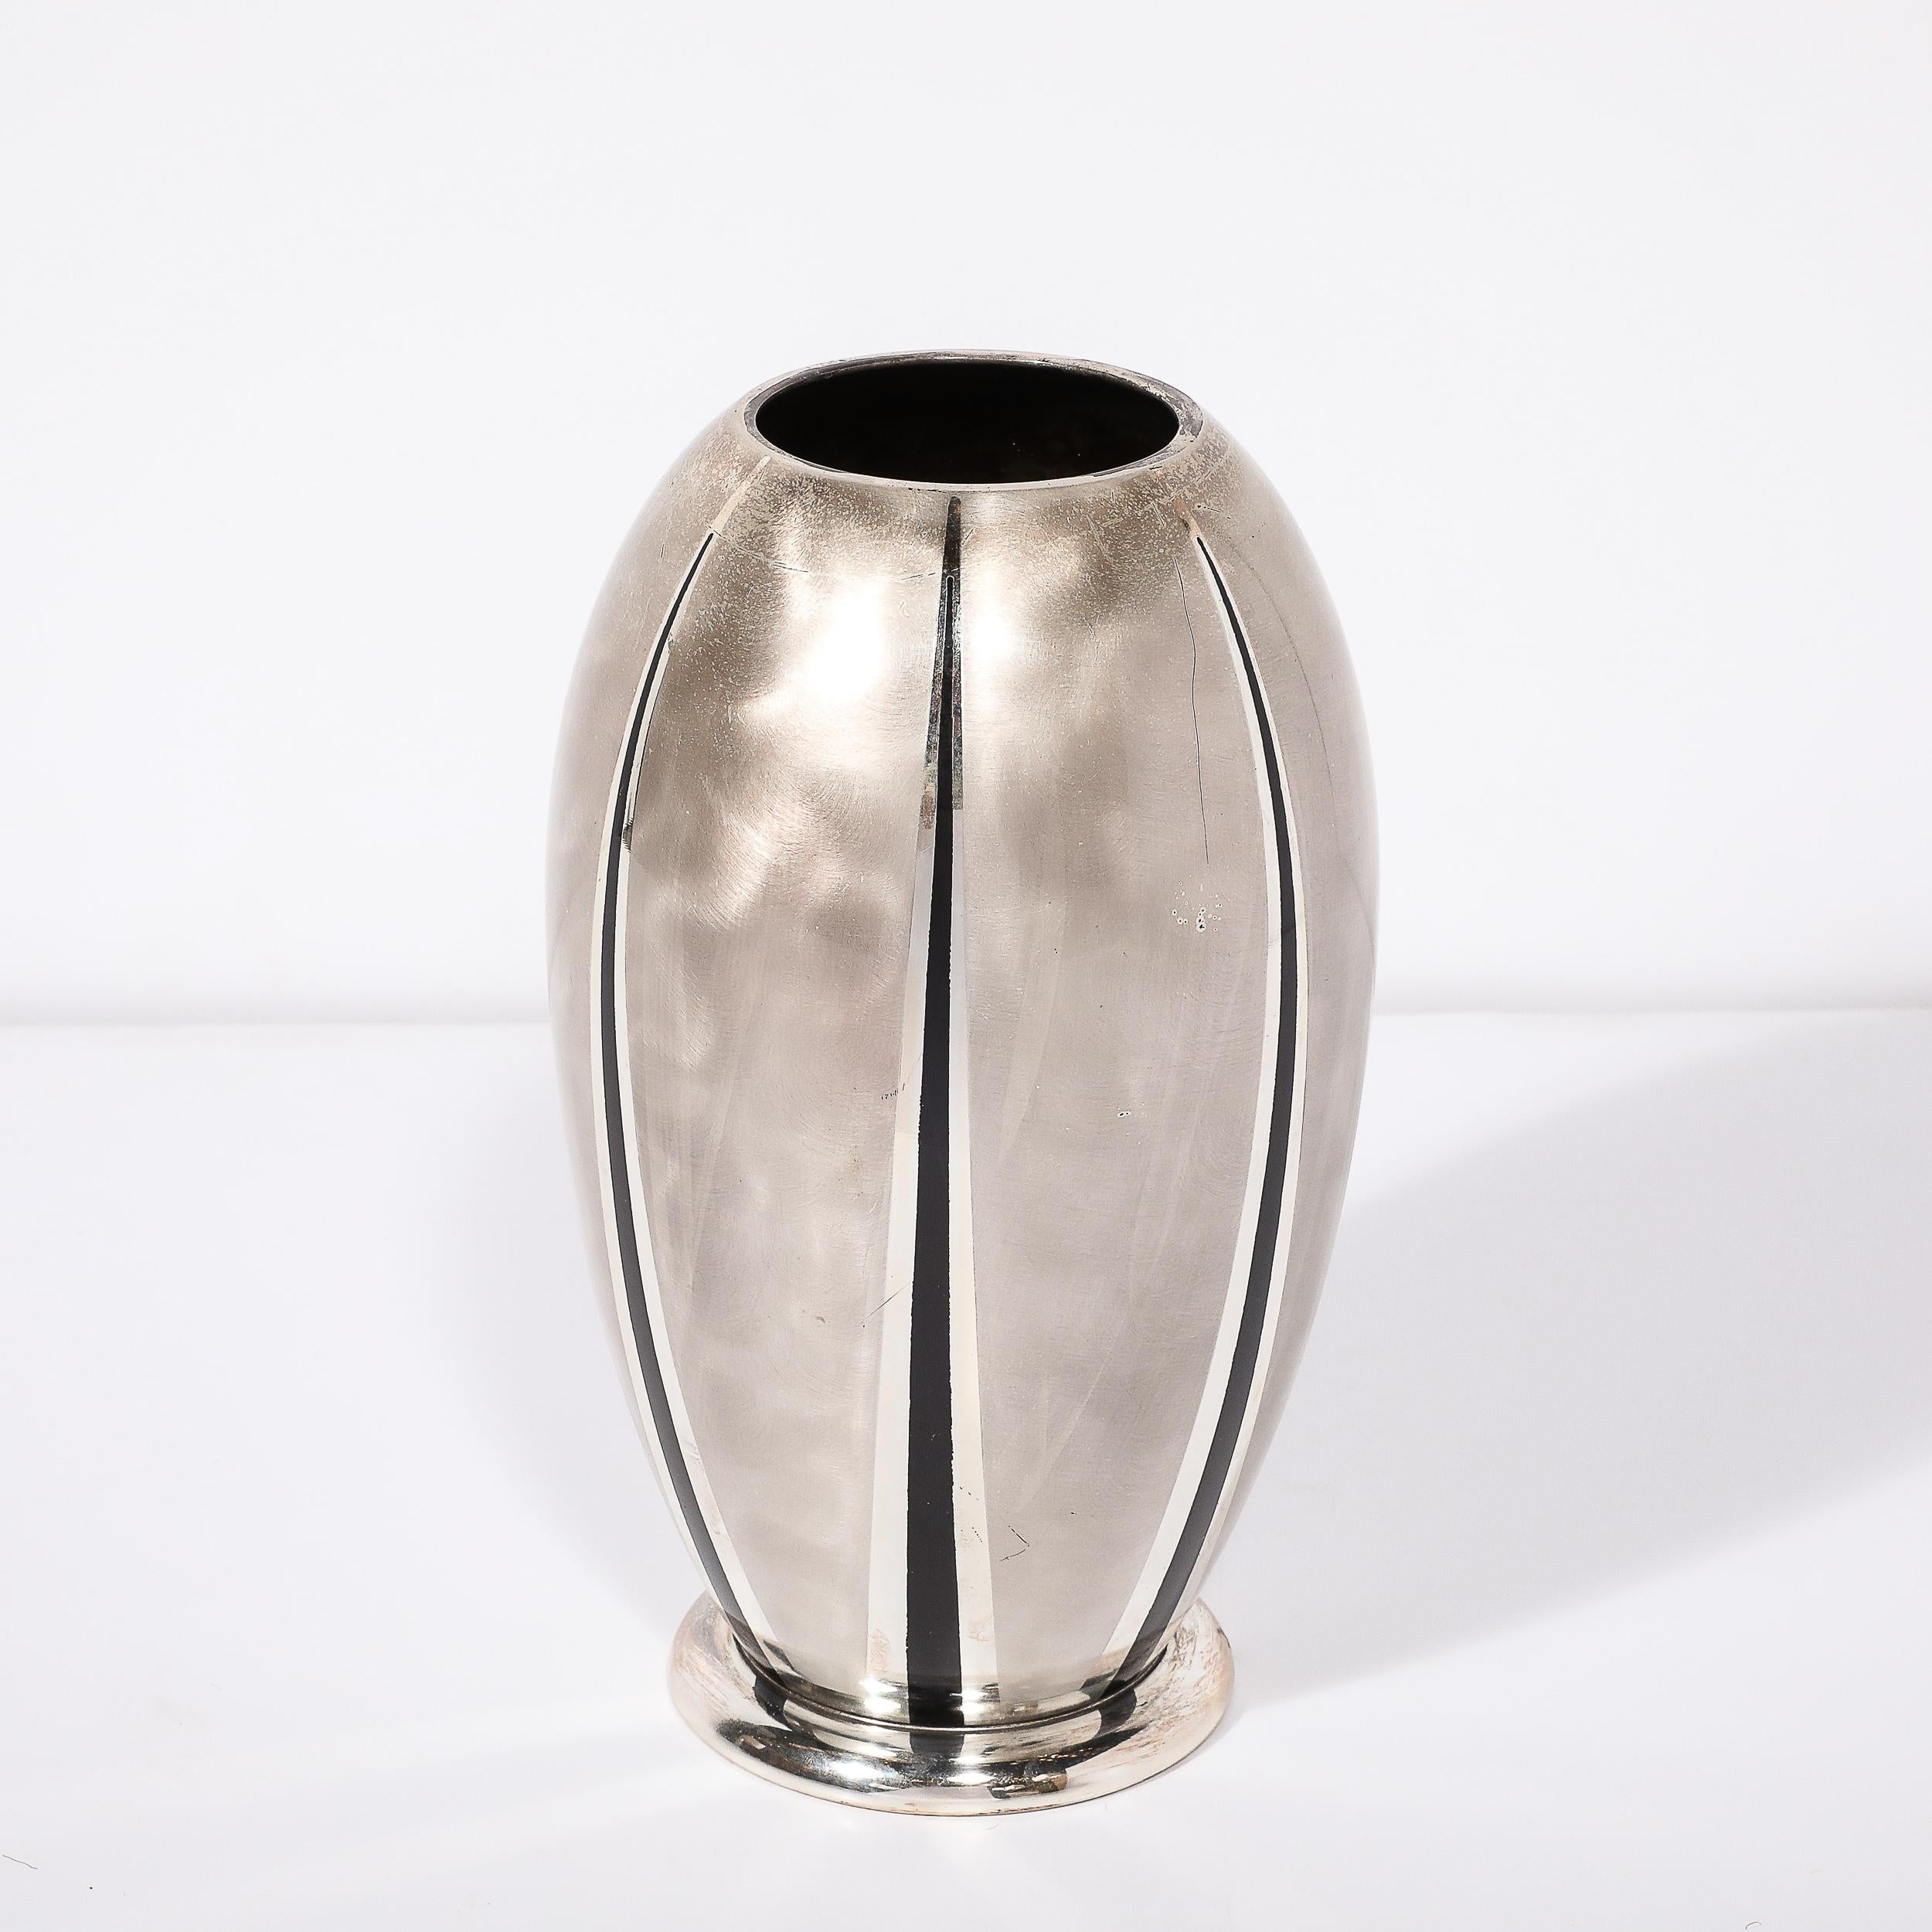 Mid-20th Century Art Deco WMF Ikora Textural Silver Plated Vase W/ Jet Black Linear Detailing